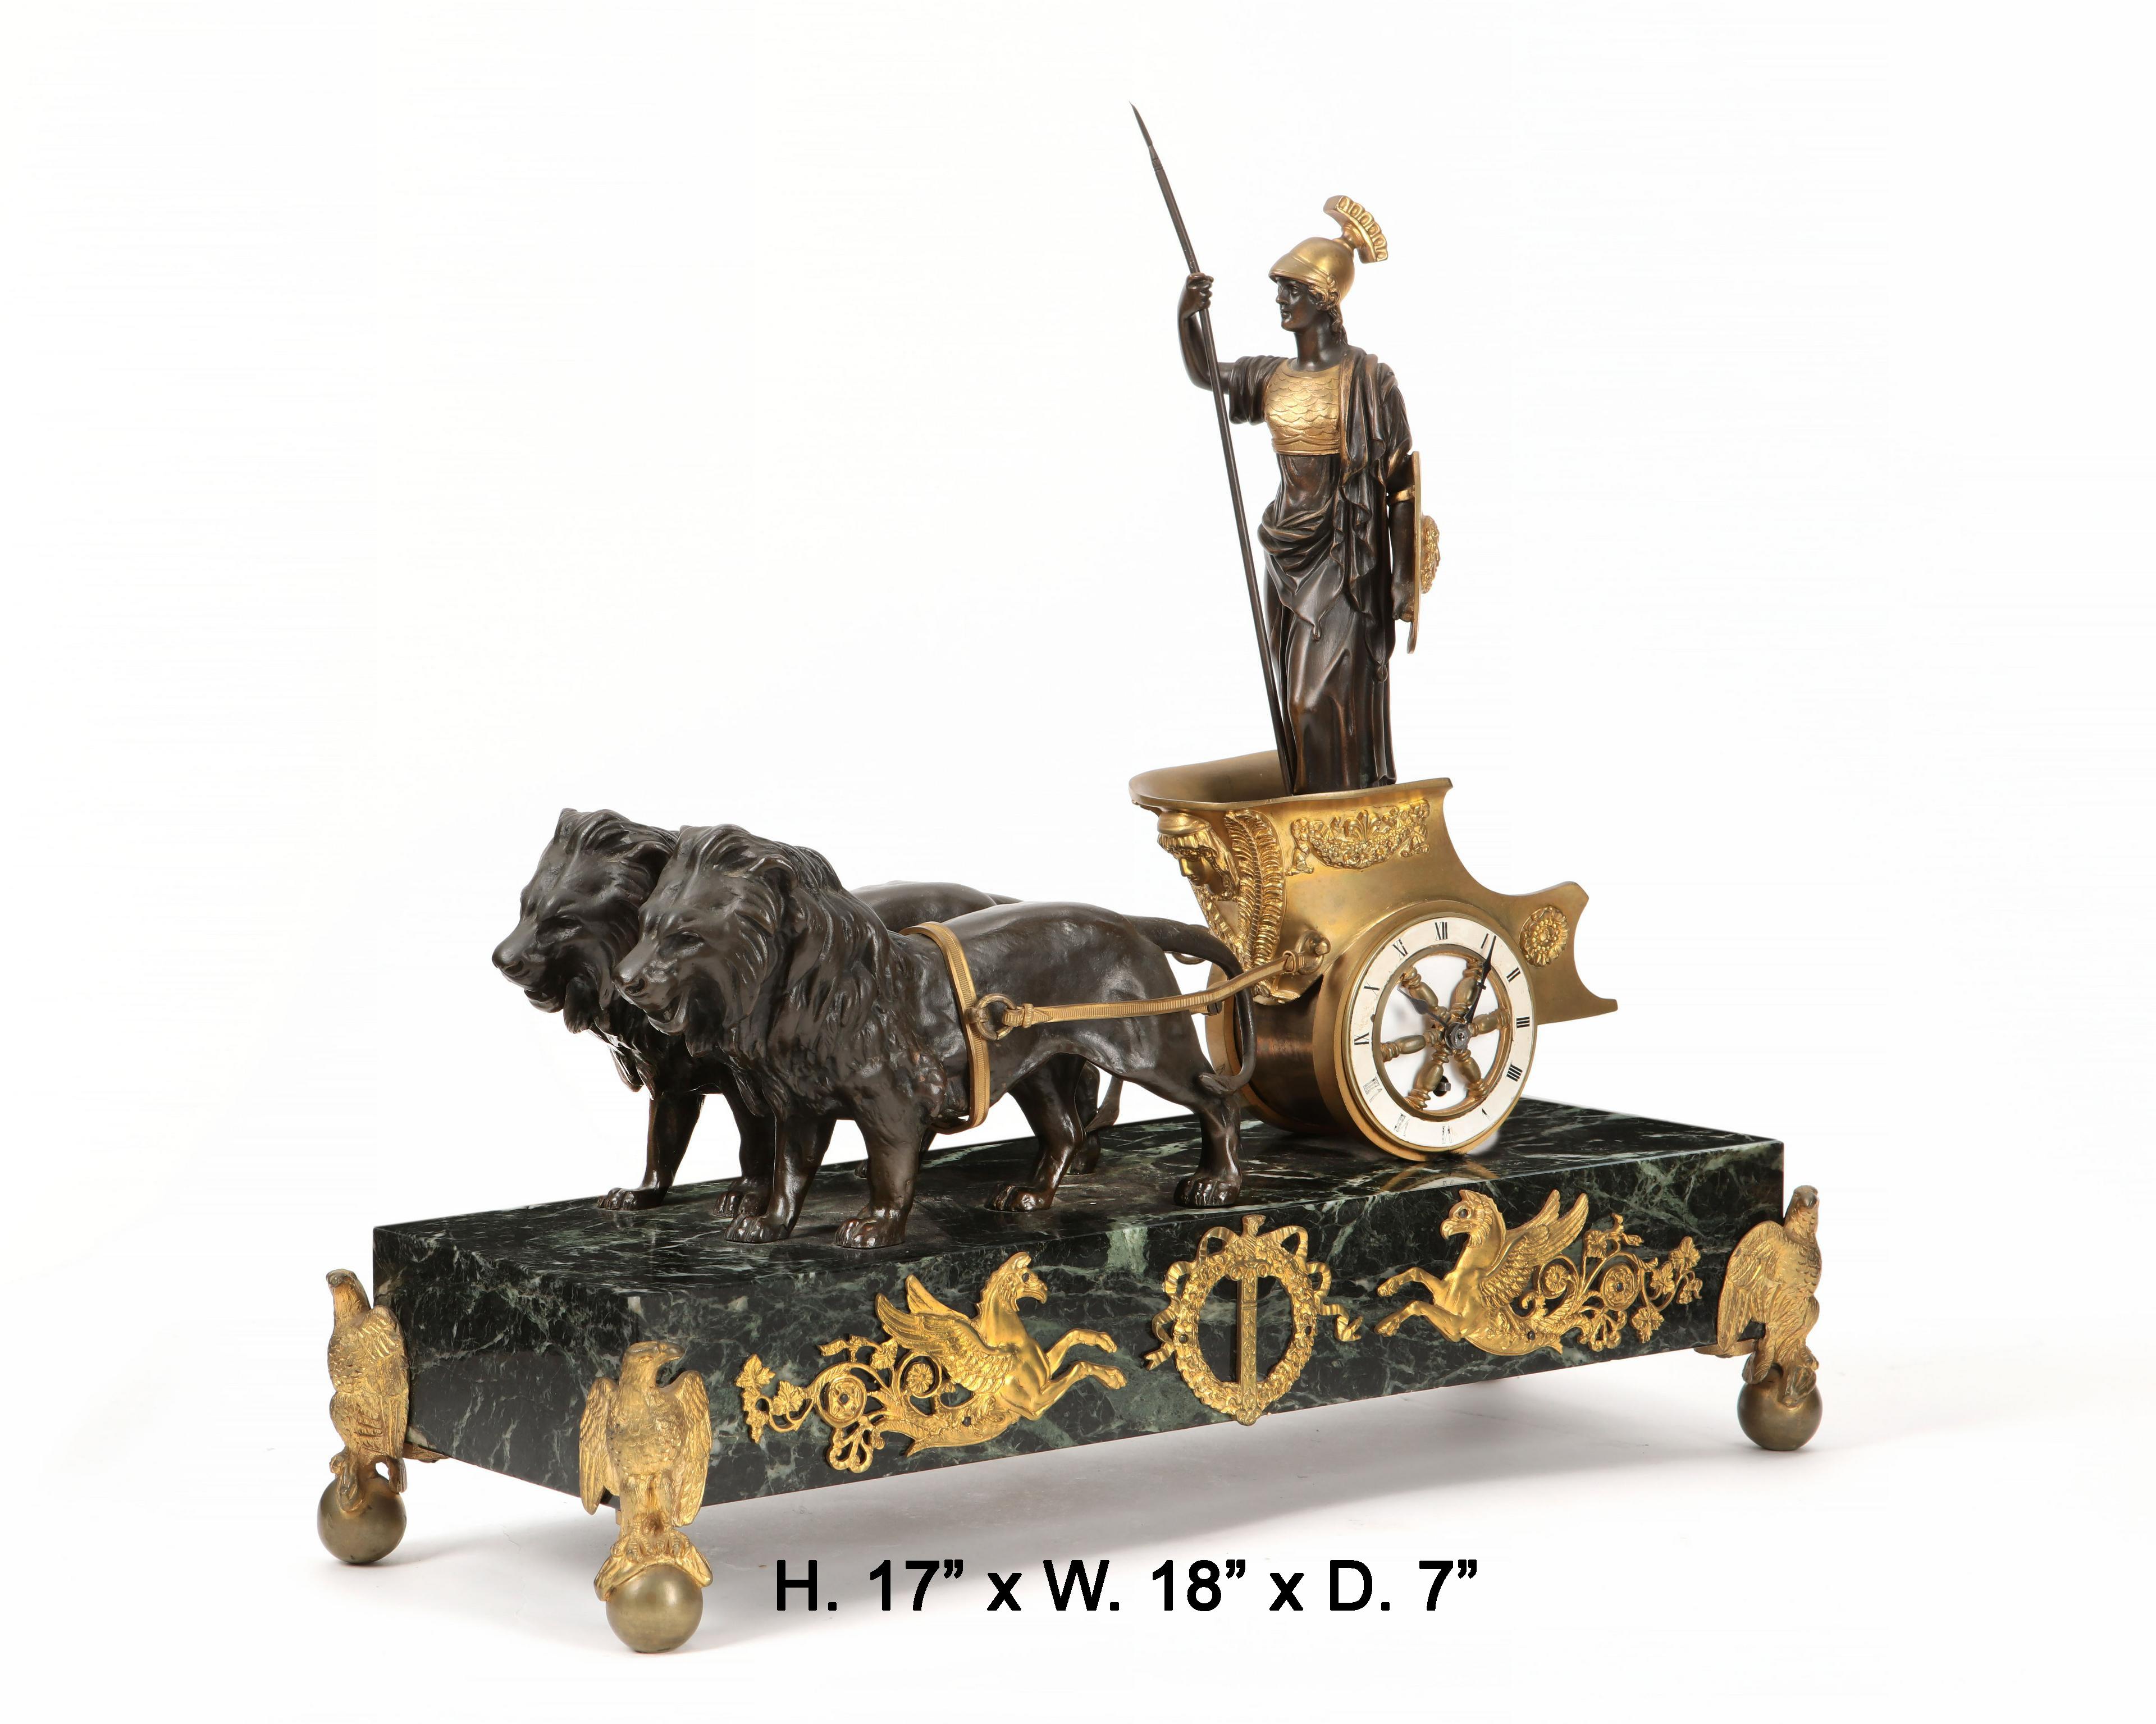 Exquisite Empire style ormolu and patinated bronze mantel clock,late 19th century.
 Surmounted by Athena in a chariot being lead by a pair of lions, meticulous attention has been given to every details, resting on a beautiful green marble